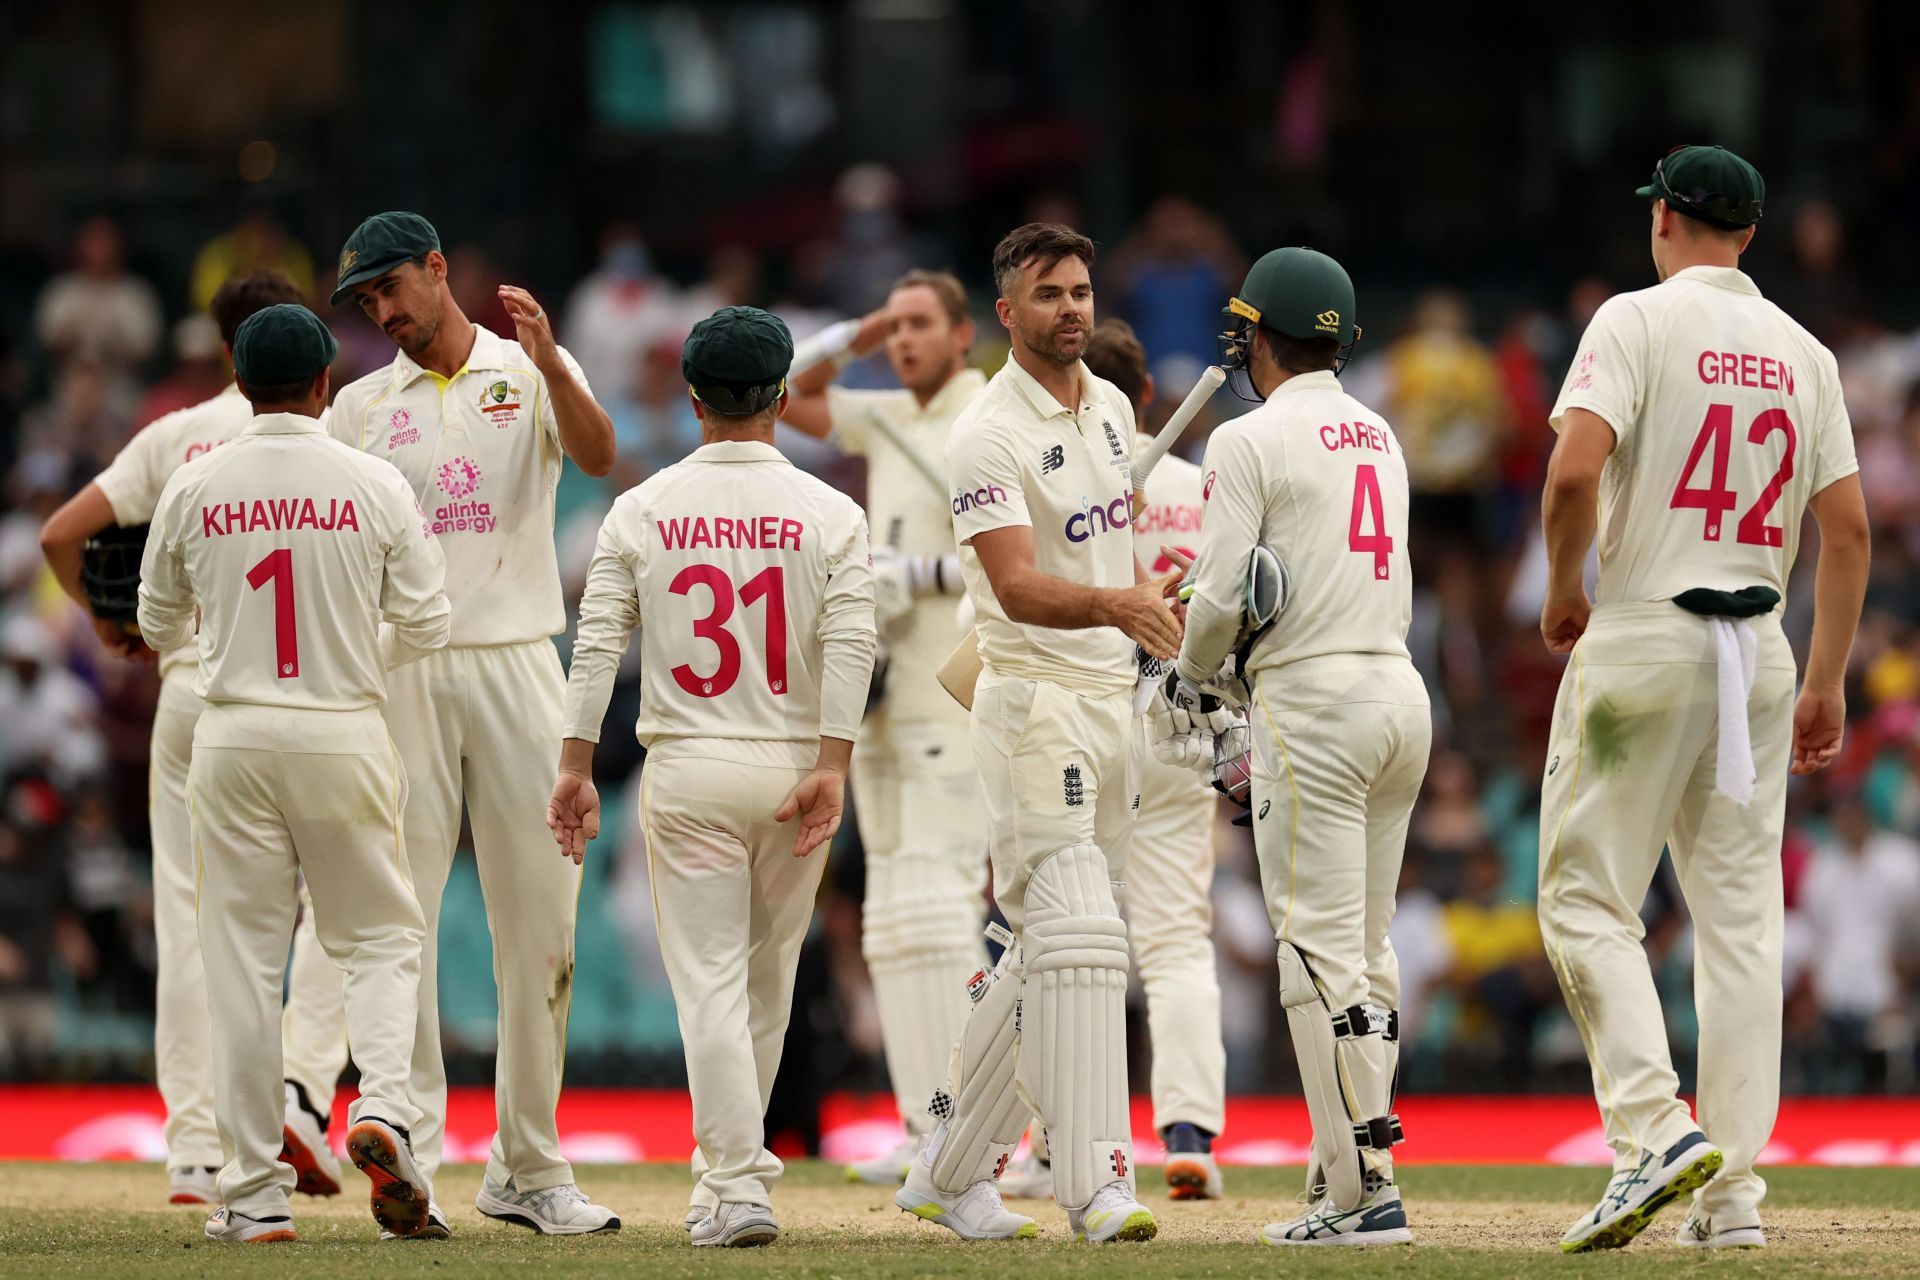 The 4th Ashes Test at the SCG was a thrilling contest